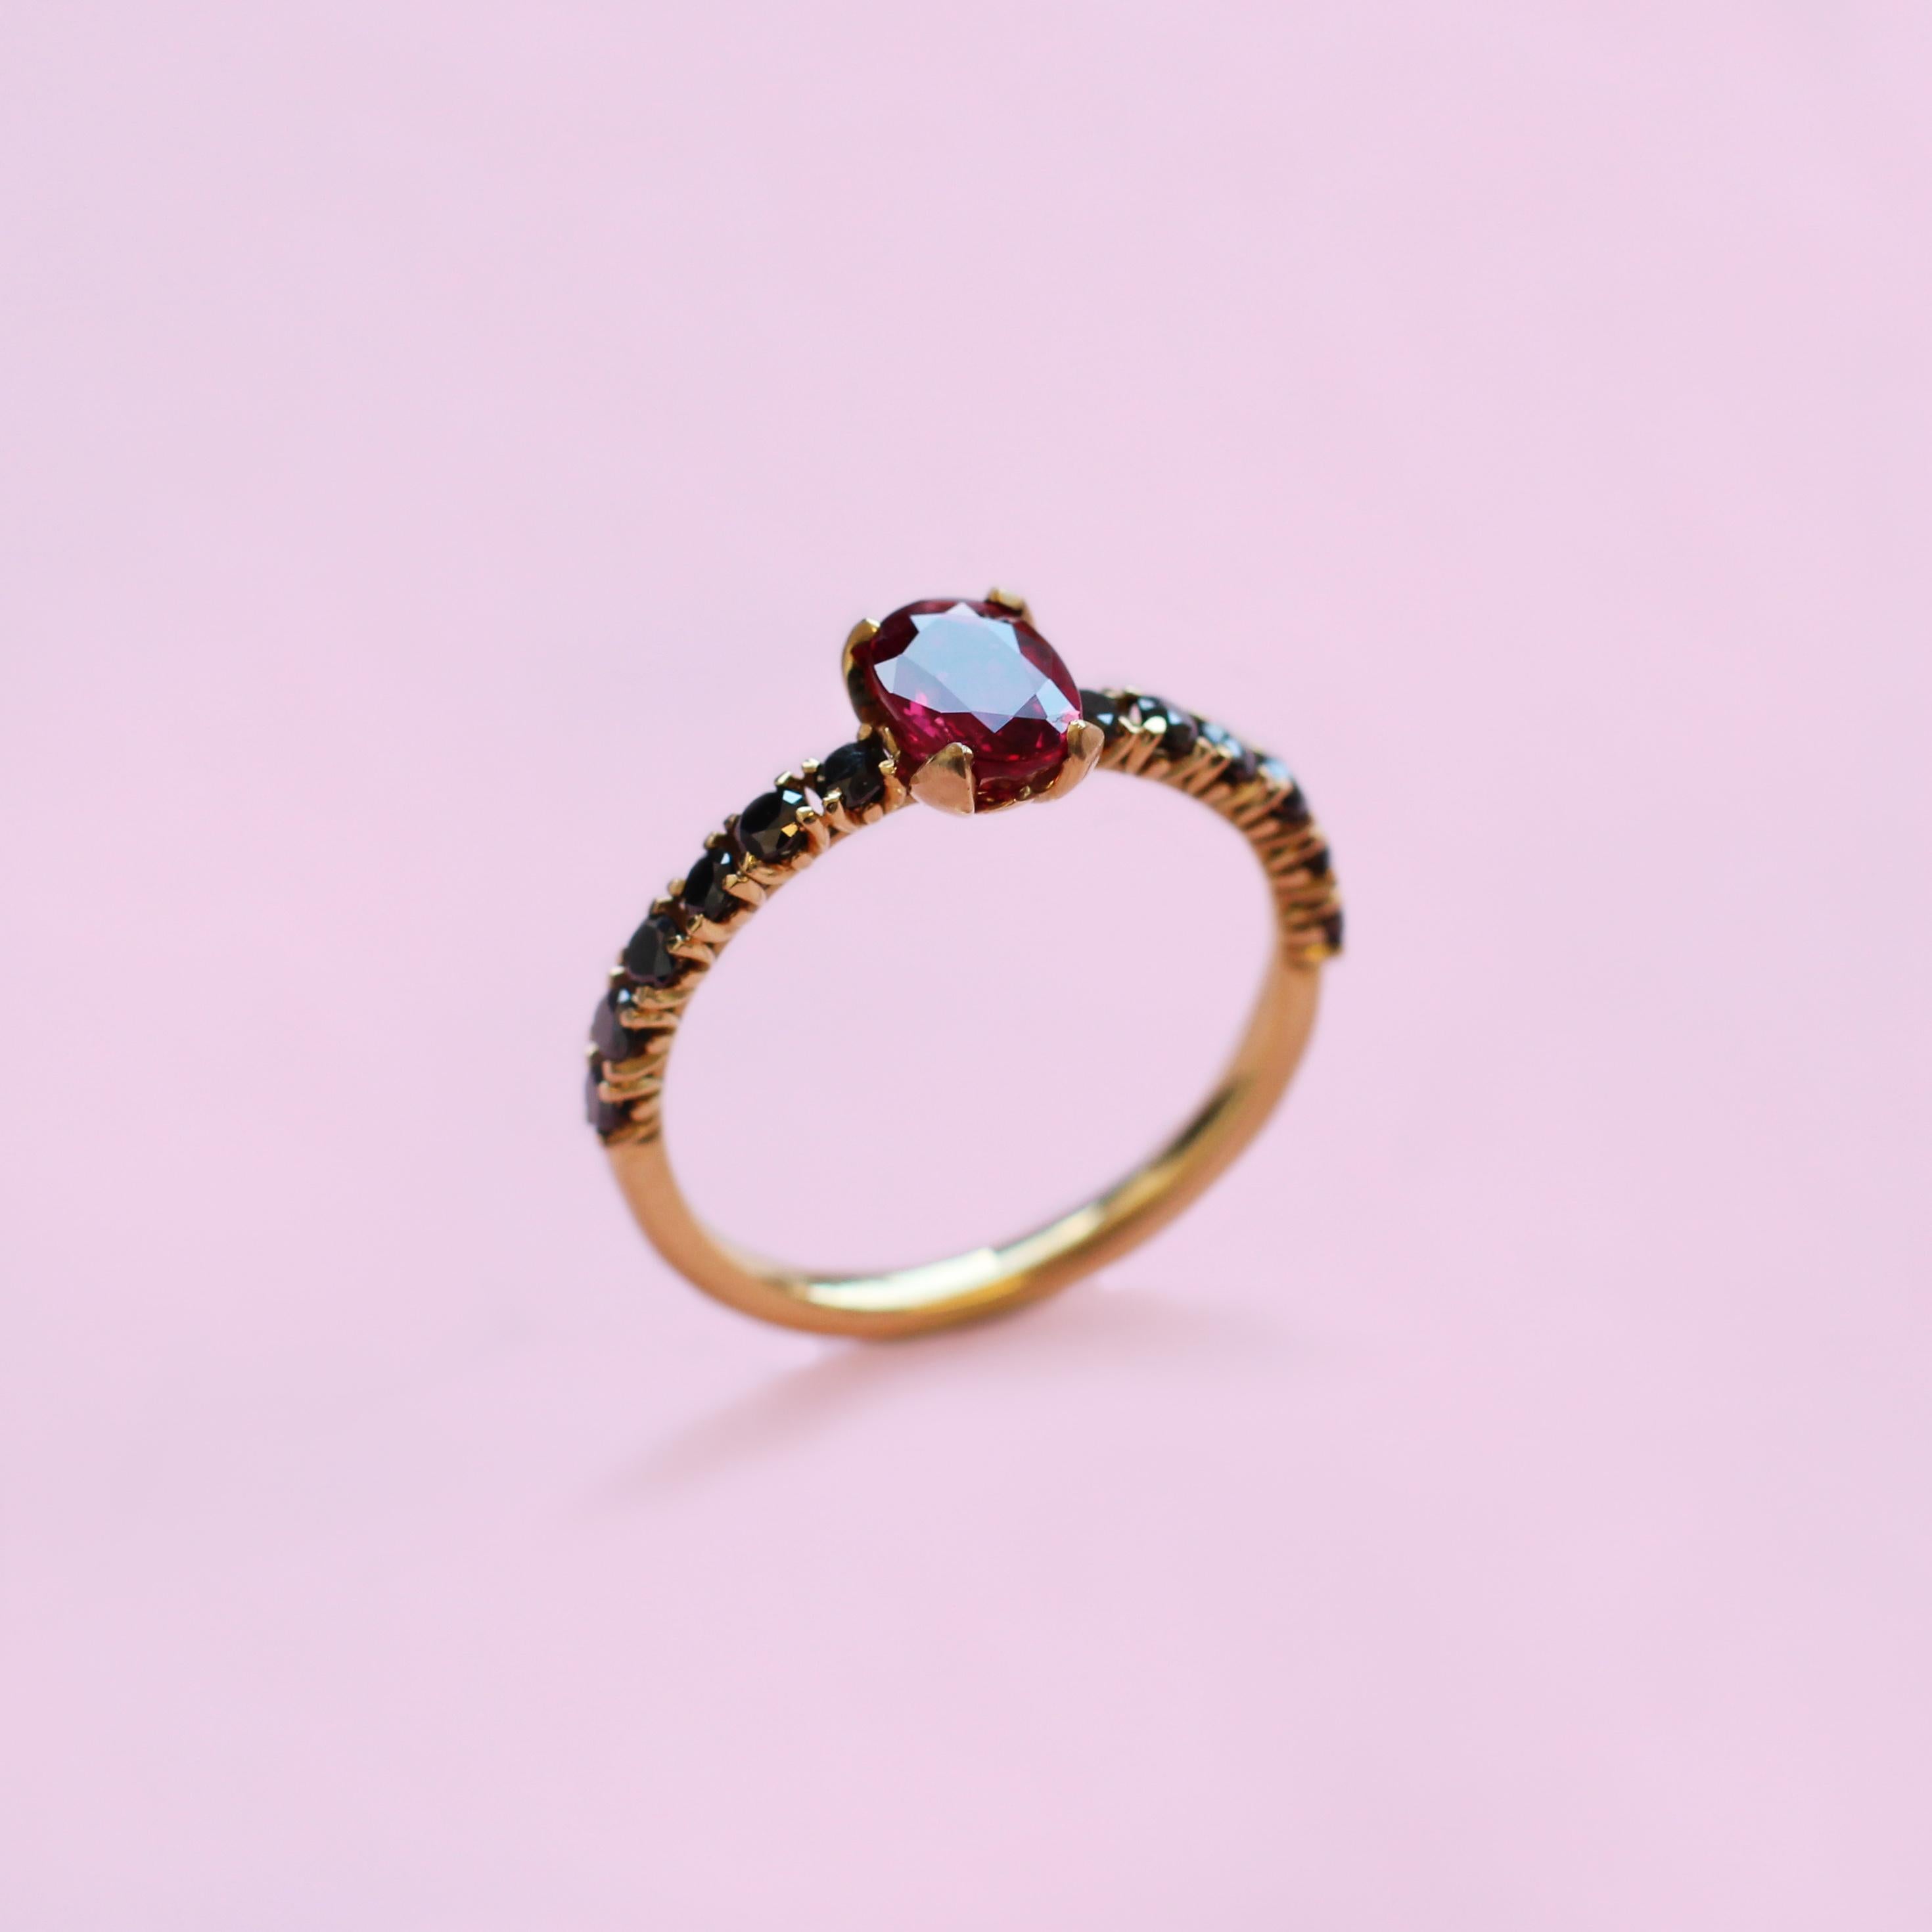 For Sale:  1 Carat Ruby and Black Diamonds Solitaire Ring Set in 18 Karat Yellow Gold 3